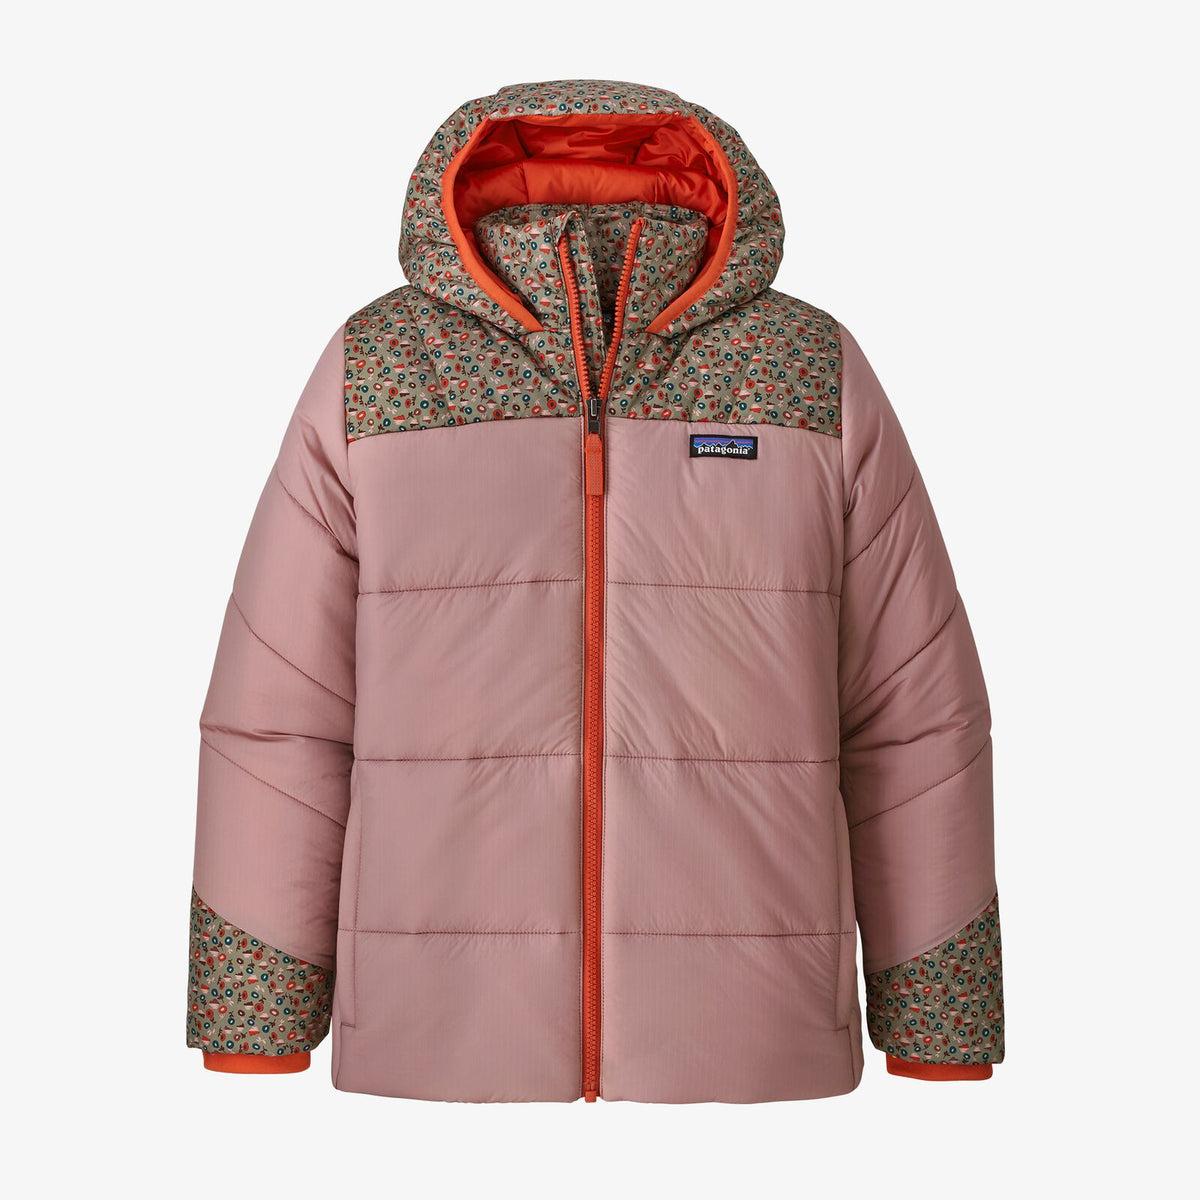 Patagonia Boy's Insulated Isthmus Jacket